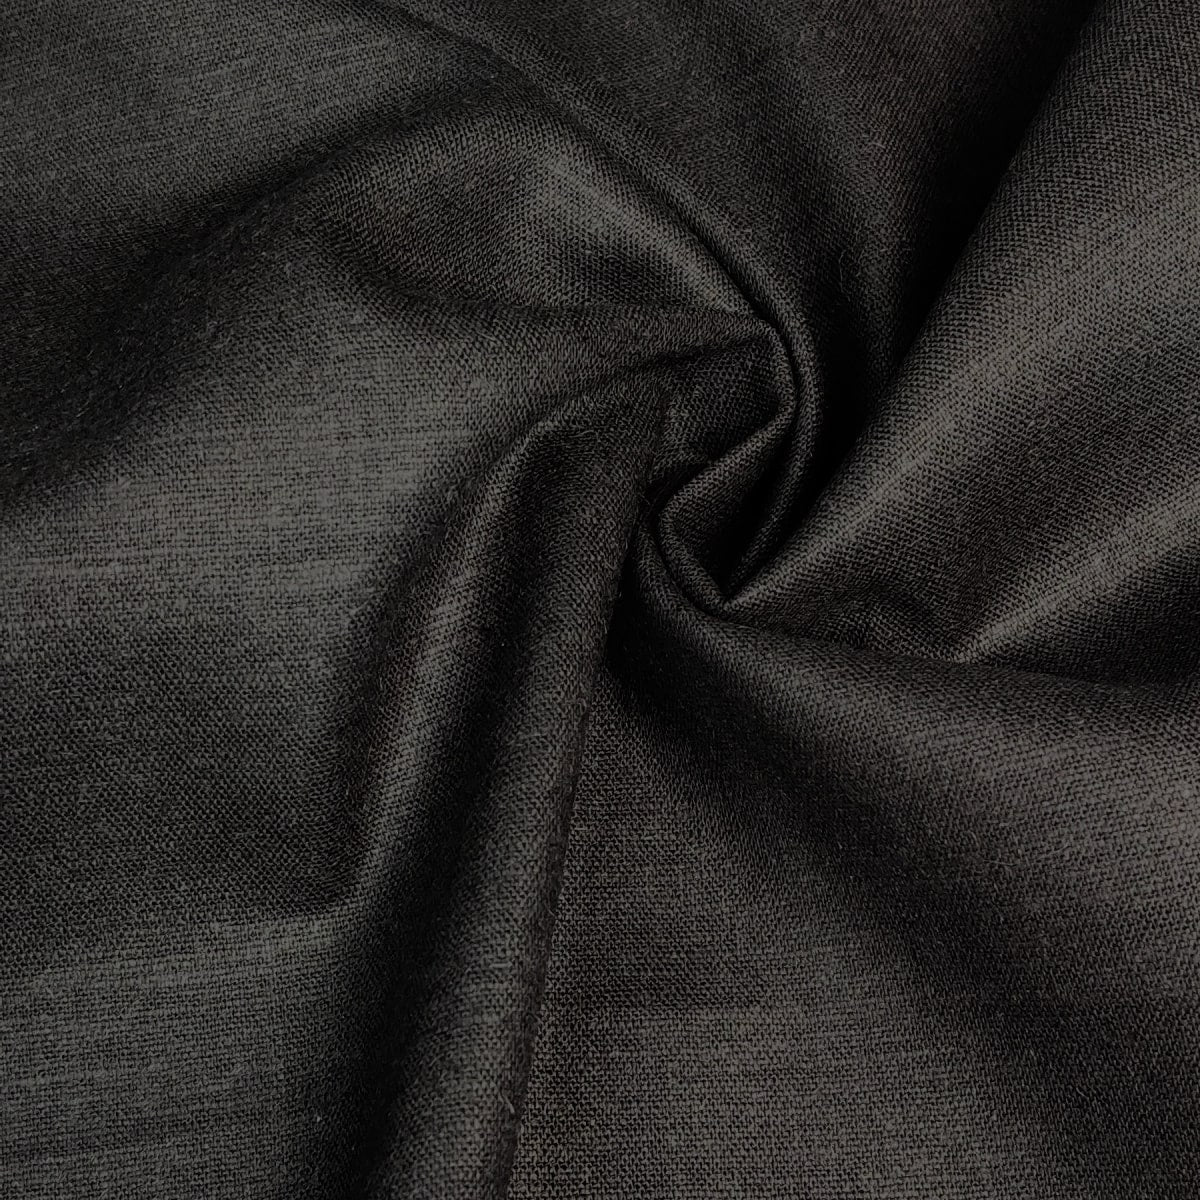 Stretch Rayon Linen Blend | Black | 89 cm | END OF ROLL